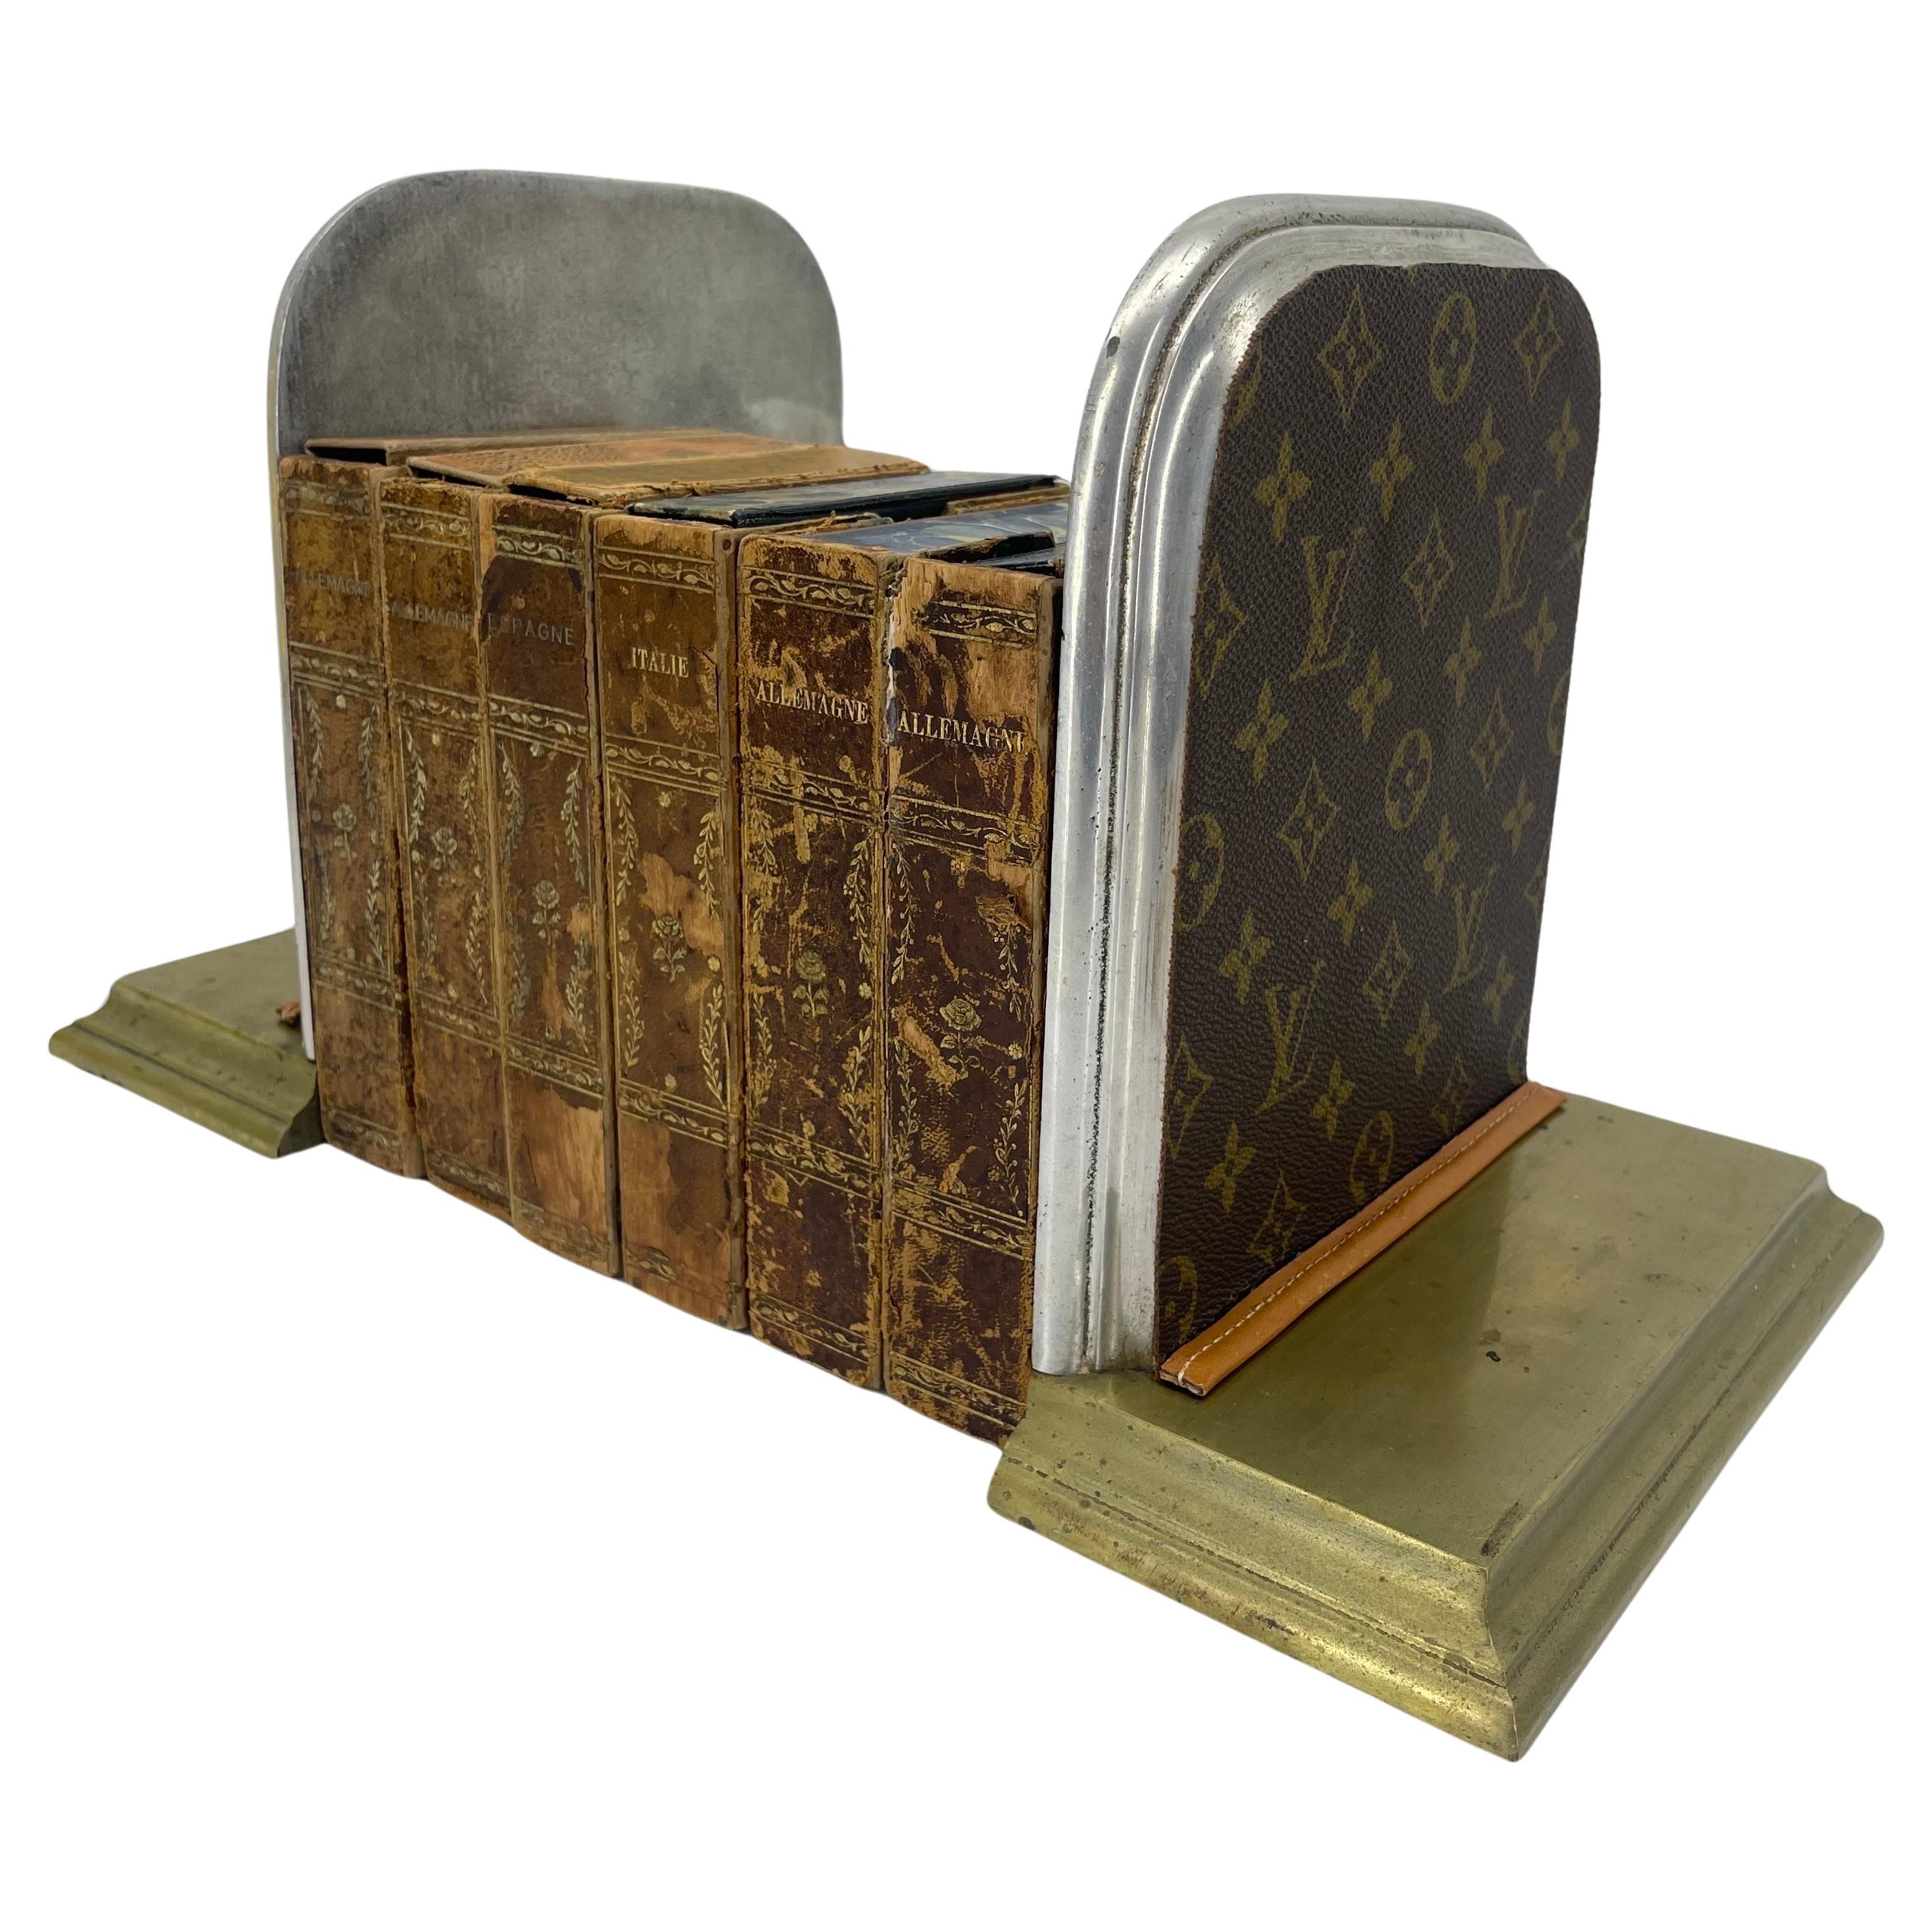 Mid-Century Pair of Brass and Chrome Bookends with Louis Vuitton Monogram Fabric

These custom, very substantial monogrammed bookends are hand crafted with authentic LV fabric and accentuated with authentic LV vachetta leather. This classic pair are